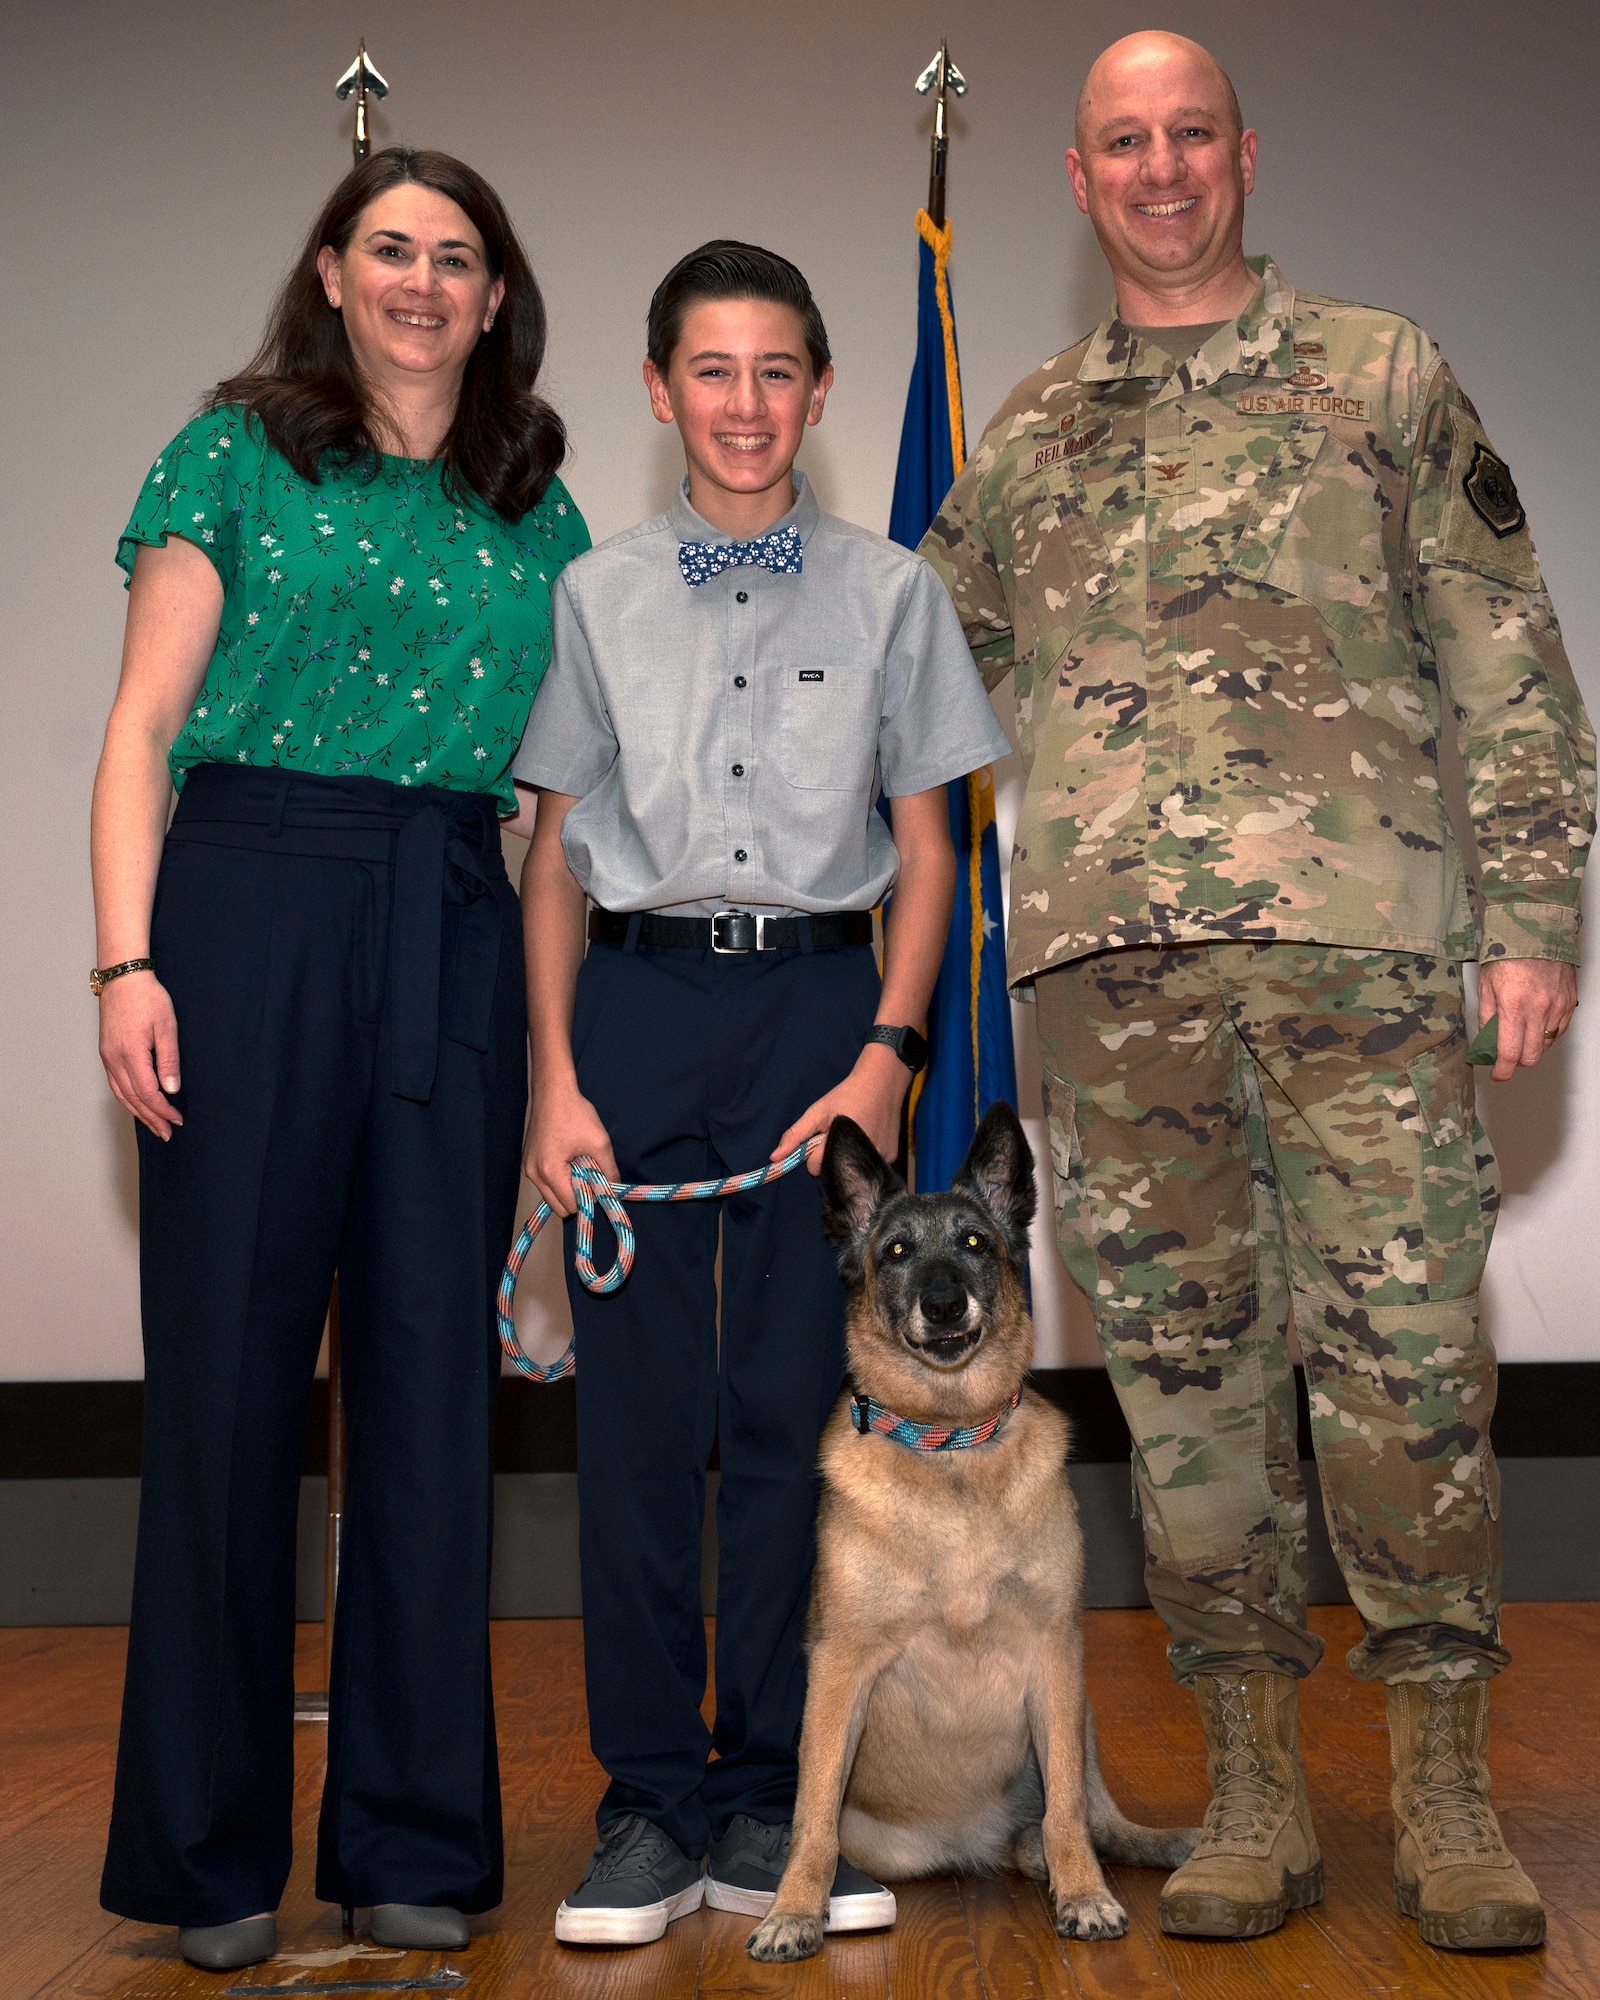 The Reilman family poses for a photo with 17th Security Forces Squadron Military Working Dog Joy during her retirement ceremony at the theater on Goodfellow Air Force Base, Dec. 20. The Reilman family has adopted Joy, giving her a home on the base she served as she transitions into retirement. (U.S. Air Force photo by Senior Airman Michael Bowman)